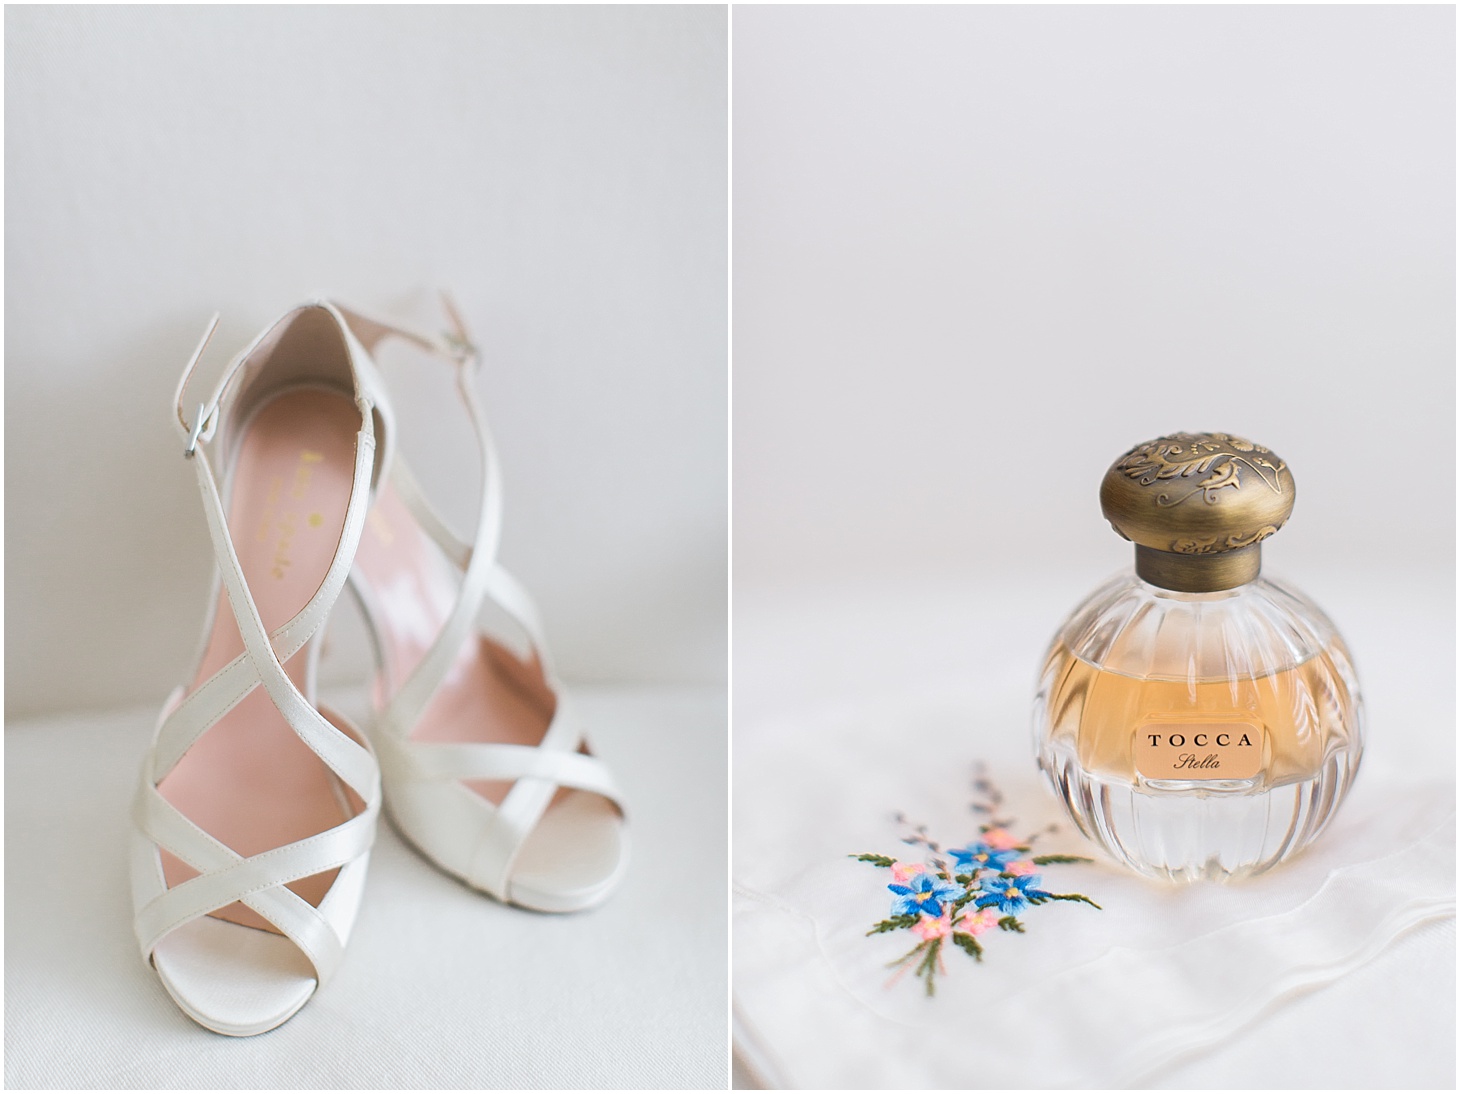 Kate Spade Wedding Shoes and Tocca Perfume | Wedding Ceremony at Old Presbyterian Meeting House | Southern Black Tie wedding at St. Regis DC in Dusty Blue and Ivory | Sarah Bradshaw Photography